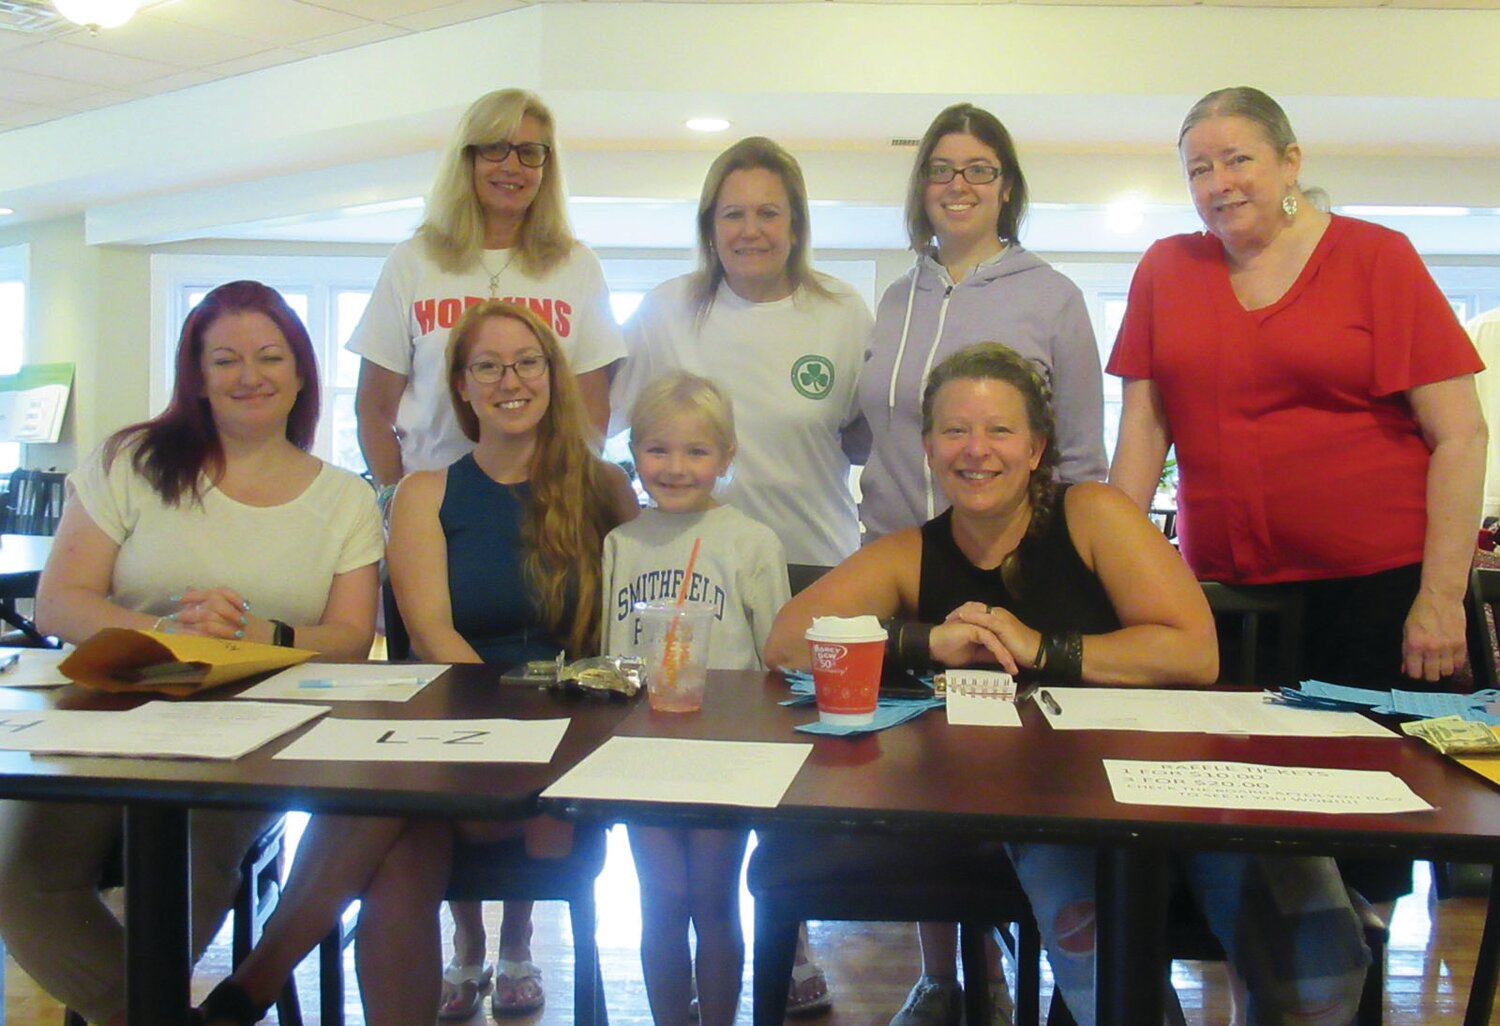 CHLOE’S CORNER: Chloe Shackelford (center), granddaughter of Cranston Mayor Ken Hopkins, joins Jen Mallowes, her mom Katie Shackelford, Laurie Chapman, Sue Beaulieu, Louis Hopkins, Brianna Puglia and Nora Warburton at the registration table prior to last week’s scholarship fund golf tourney.